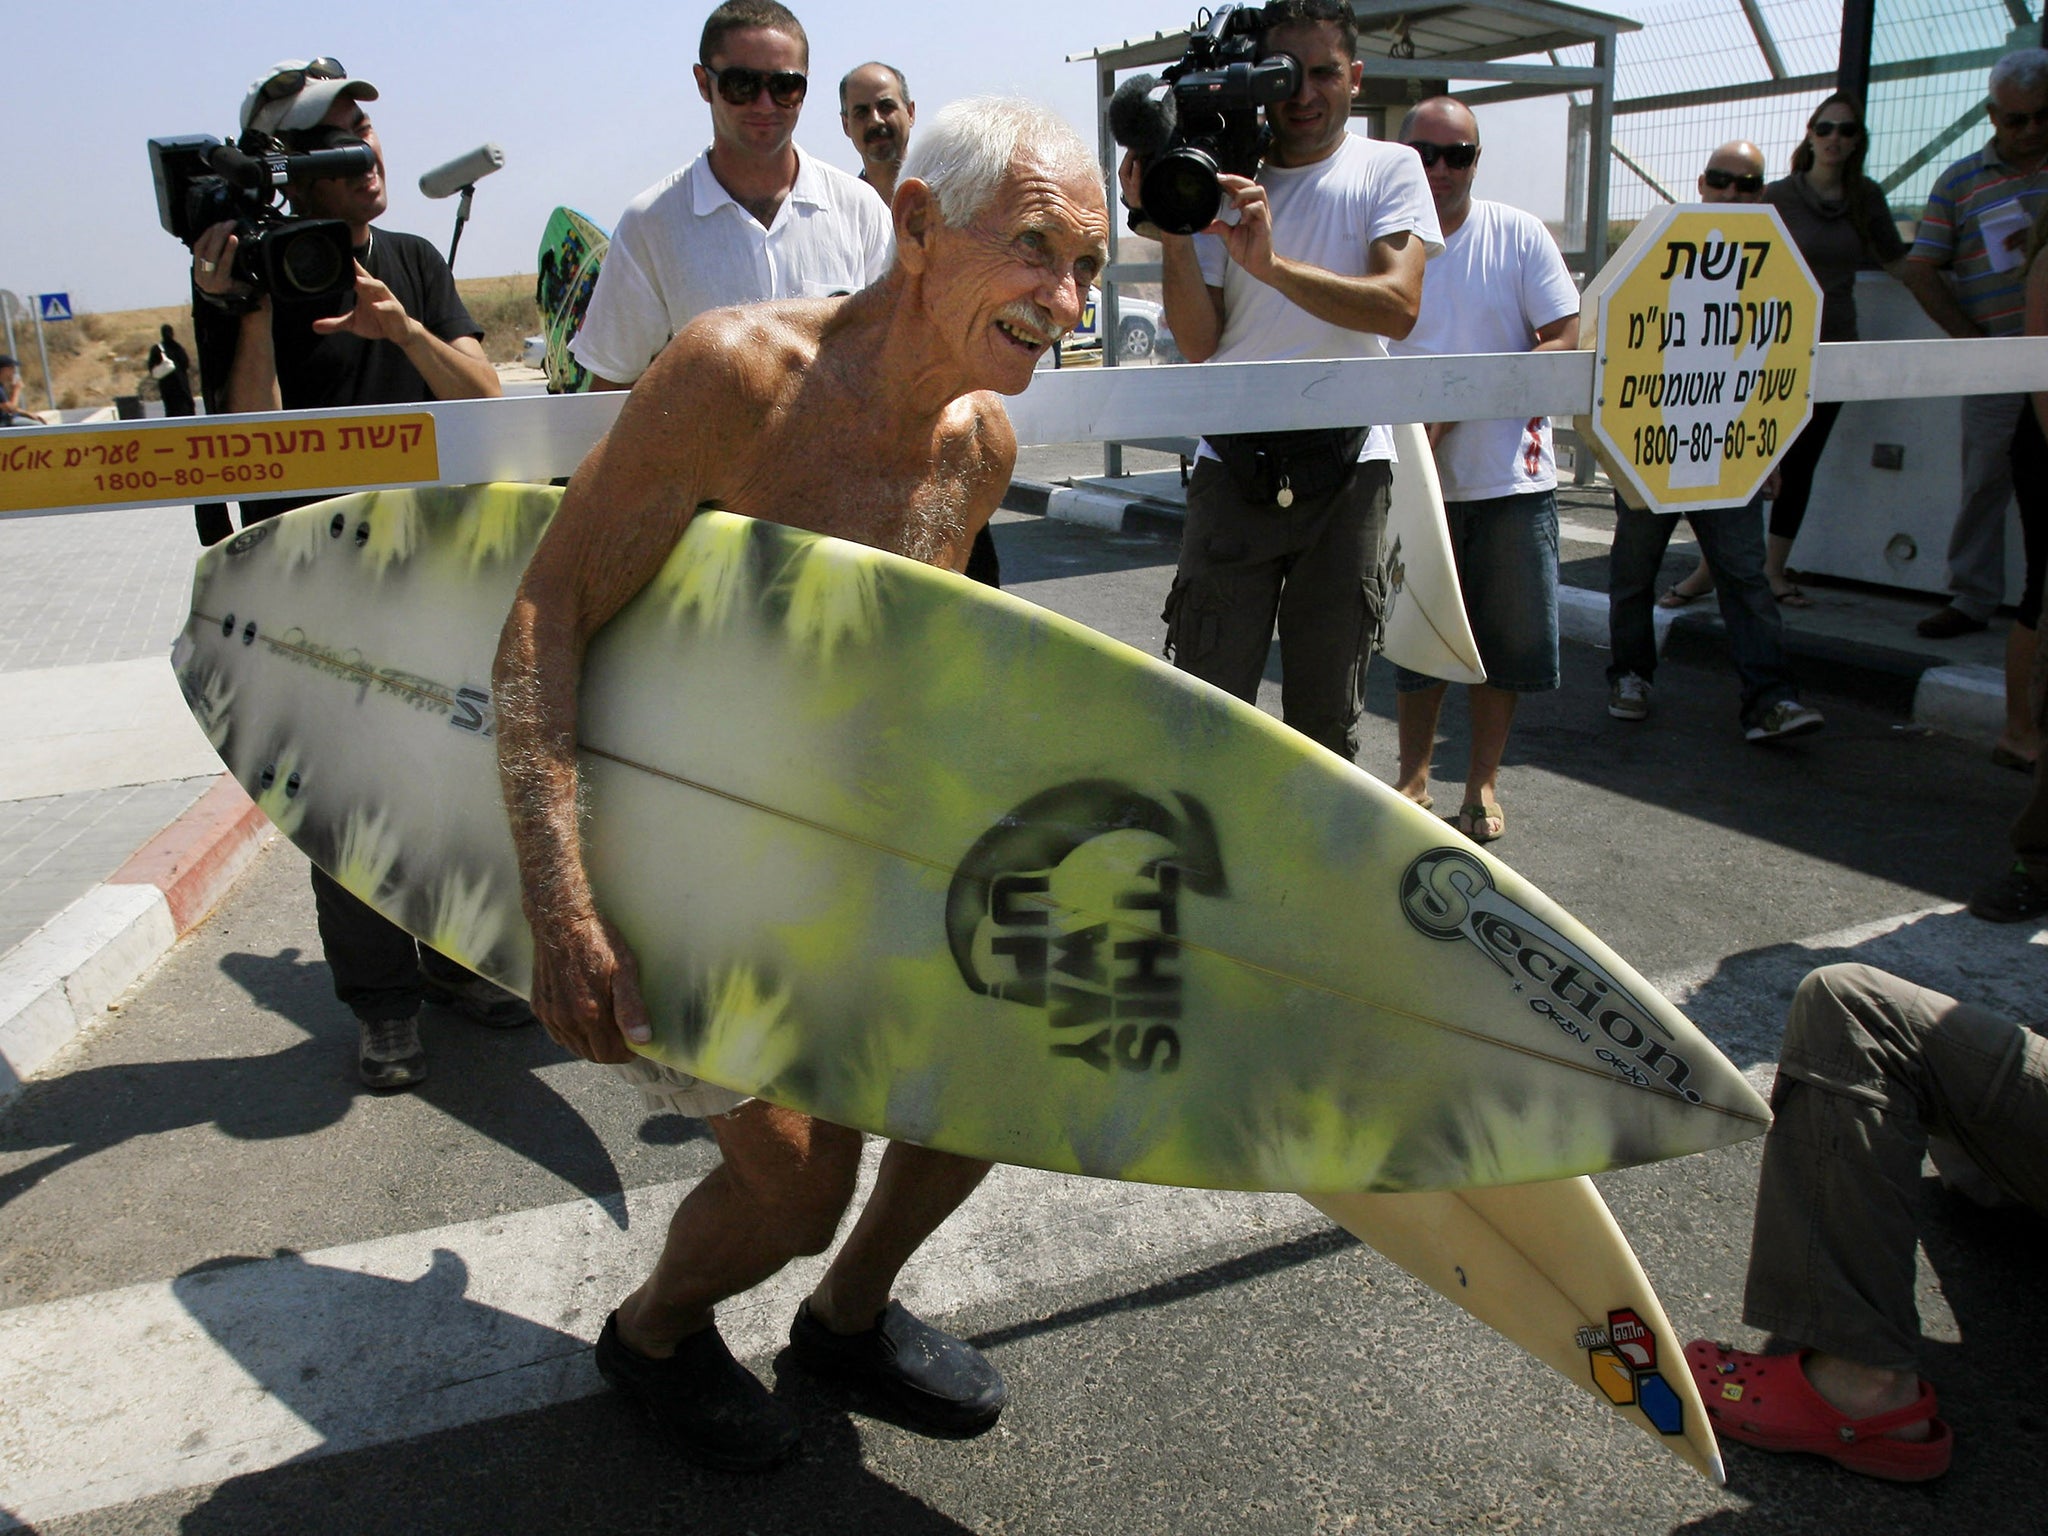 American surfer Dorian Paskowitz, 86, was the eccentric patriarch of America’s “First Family of Surfing”